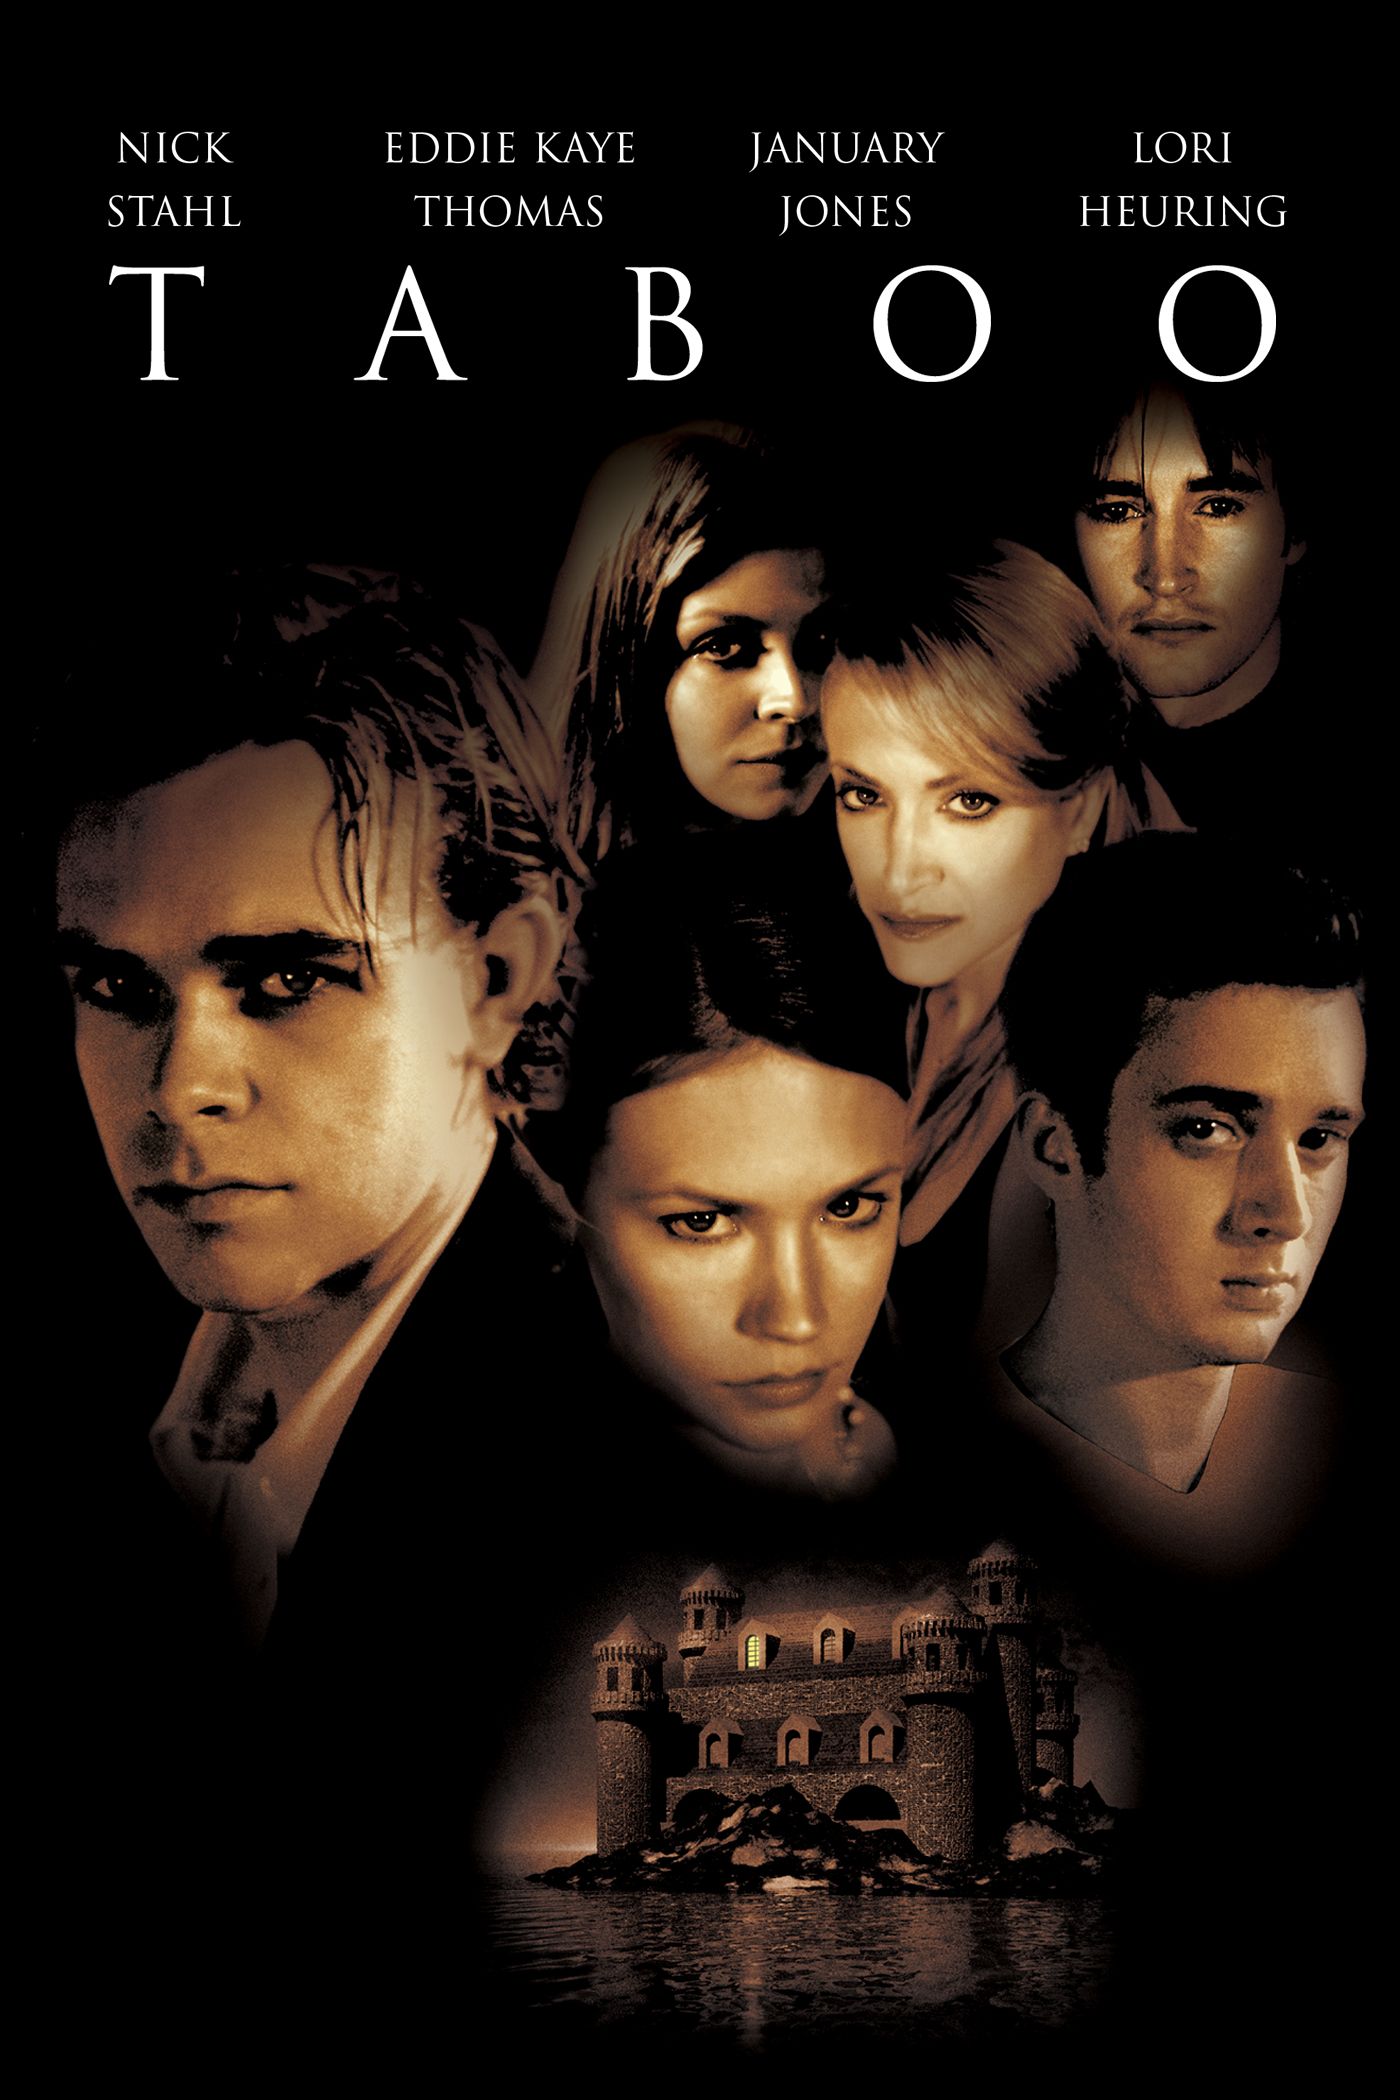 amy jew recommends Full Length Taboo Movies